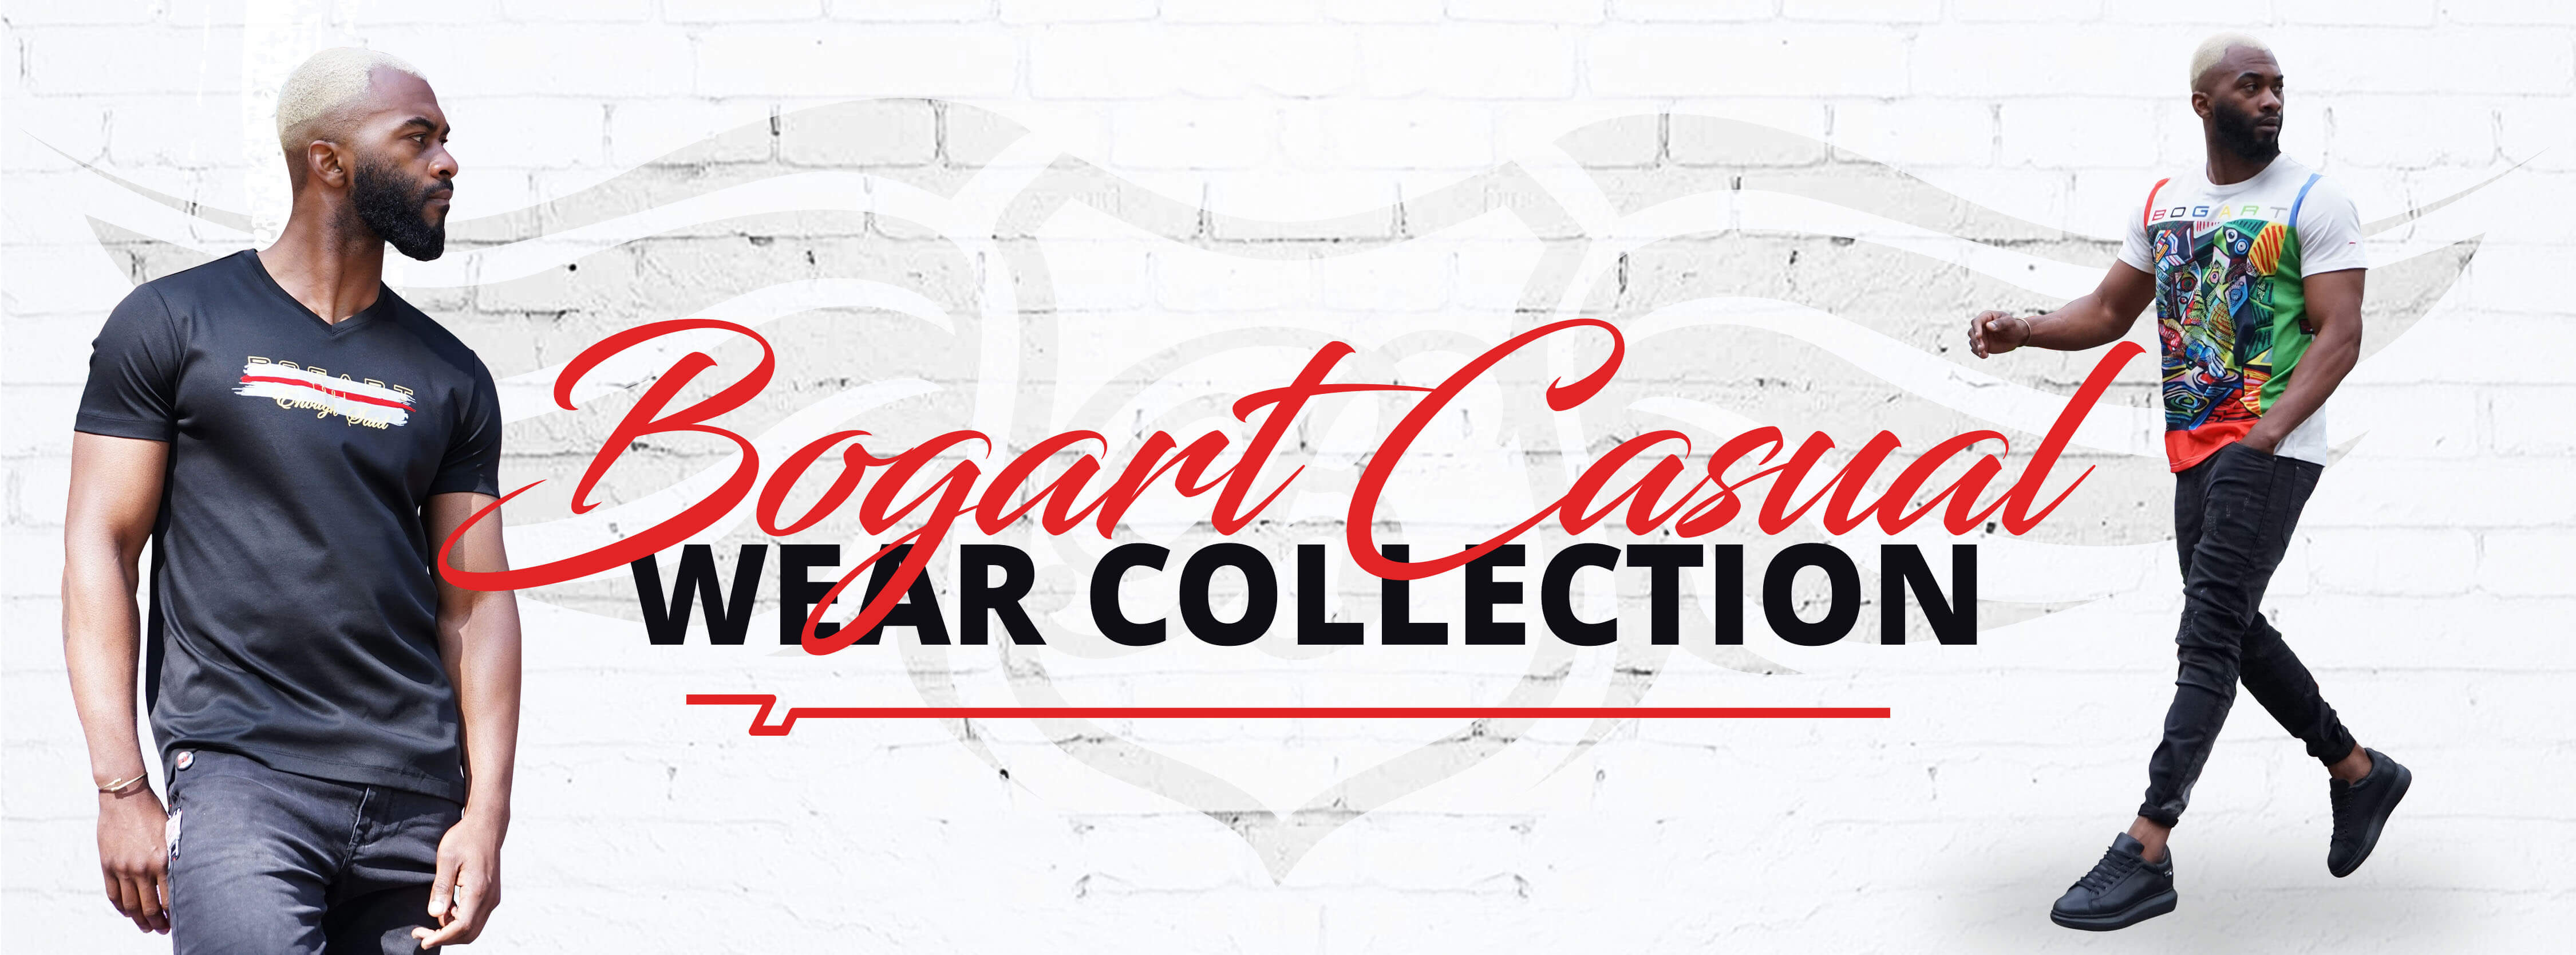 Causal Wear Collection Banner Image 